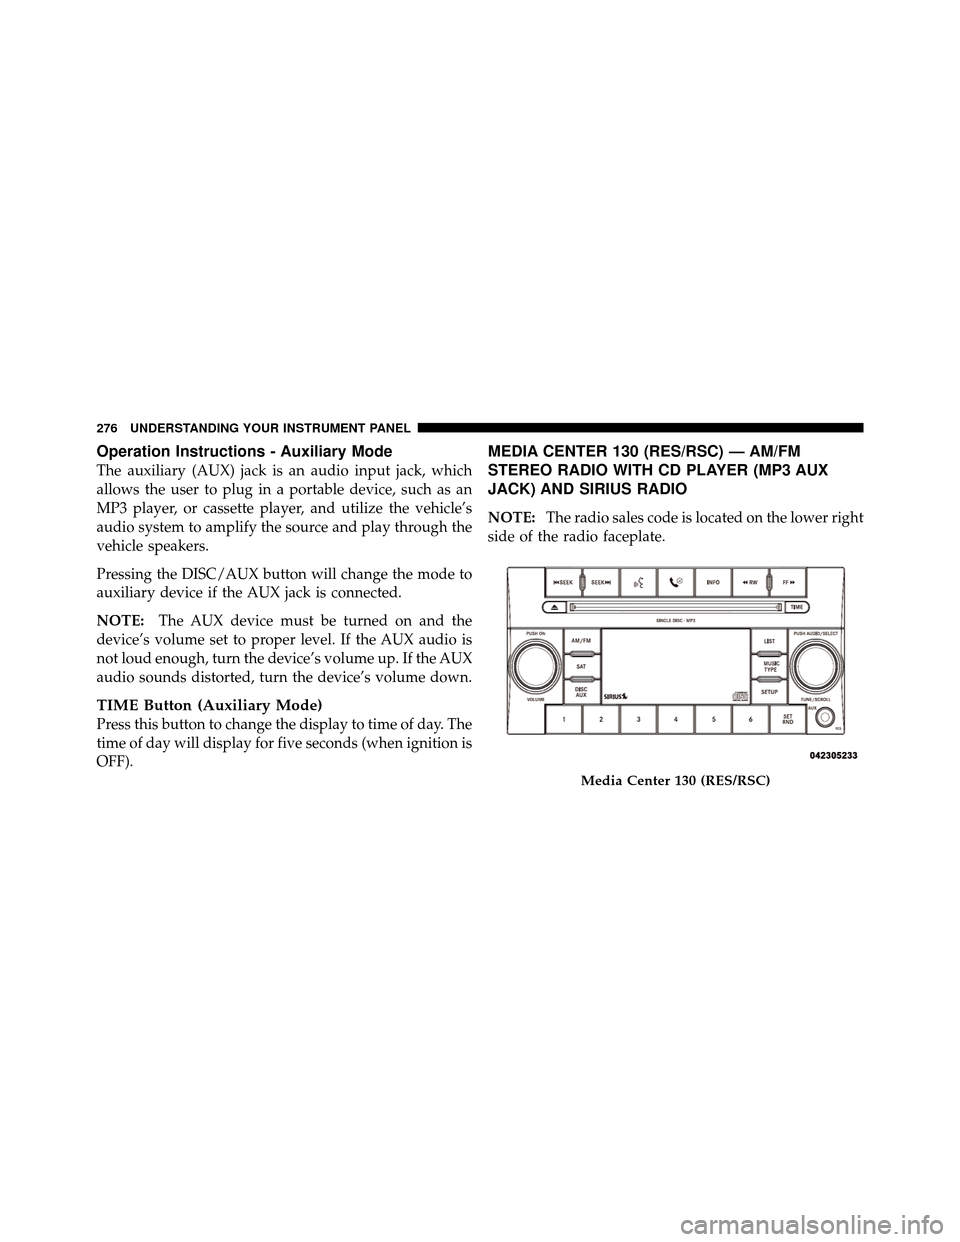 CHRYSLER TOWN AND COUNTRY 2010 5.G Manual Online Operation Instructions - Auxiliary Mode
The auxiliary (AUX) jack is an audio input jack, which
allows the user to plug in a portable device, such as an
MP3 player, or cassette player, and utilize the 